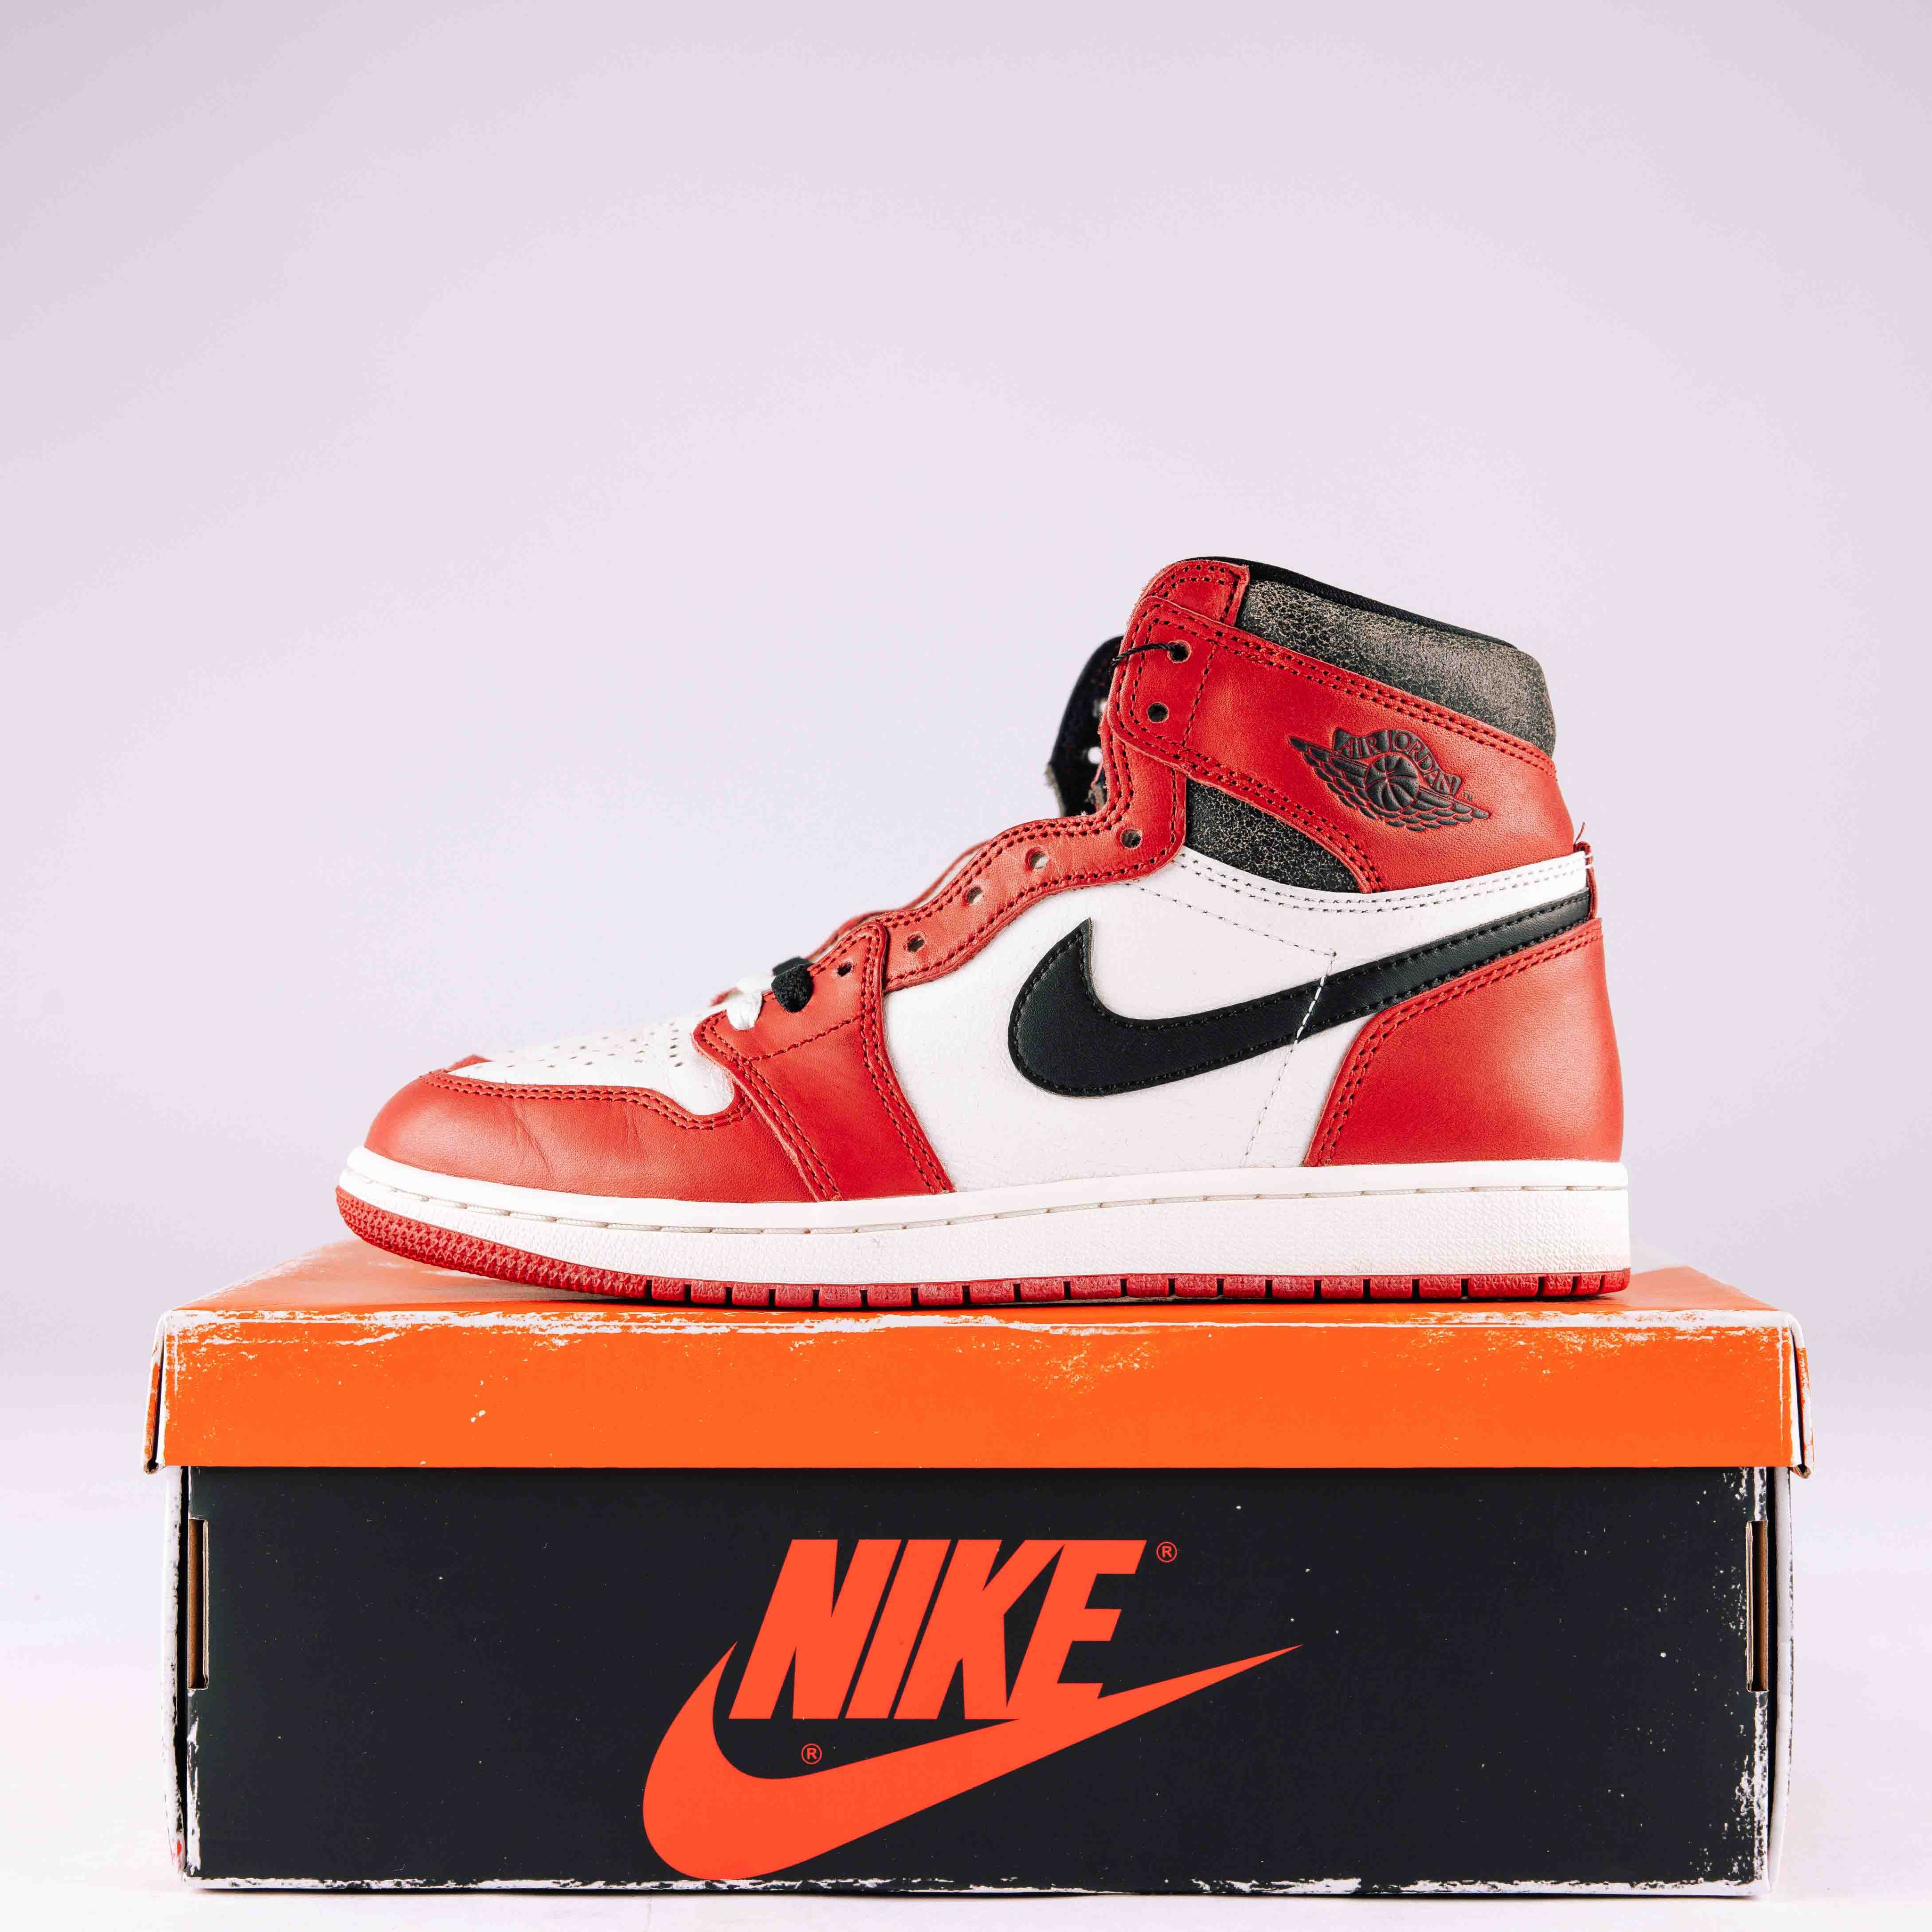 Jordan 1 Retro High OG Chicago Lost and Found (Used))